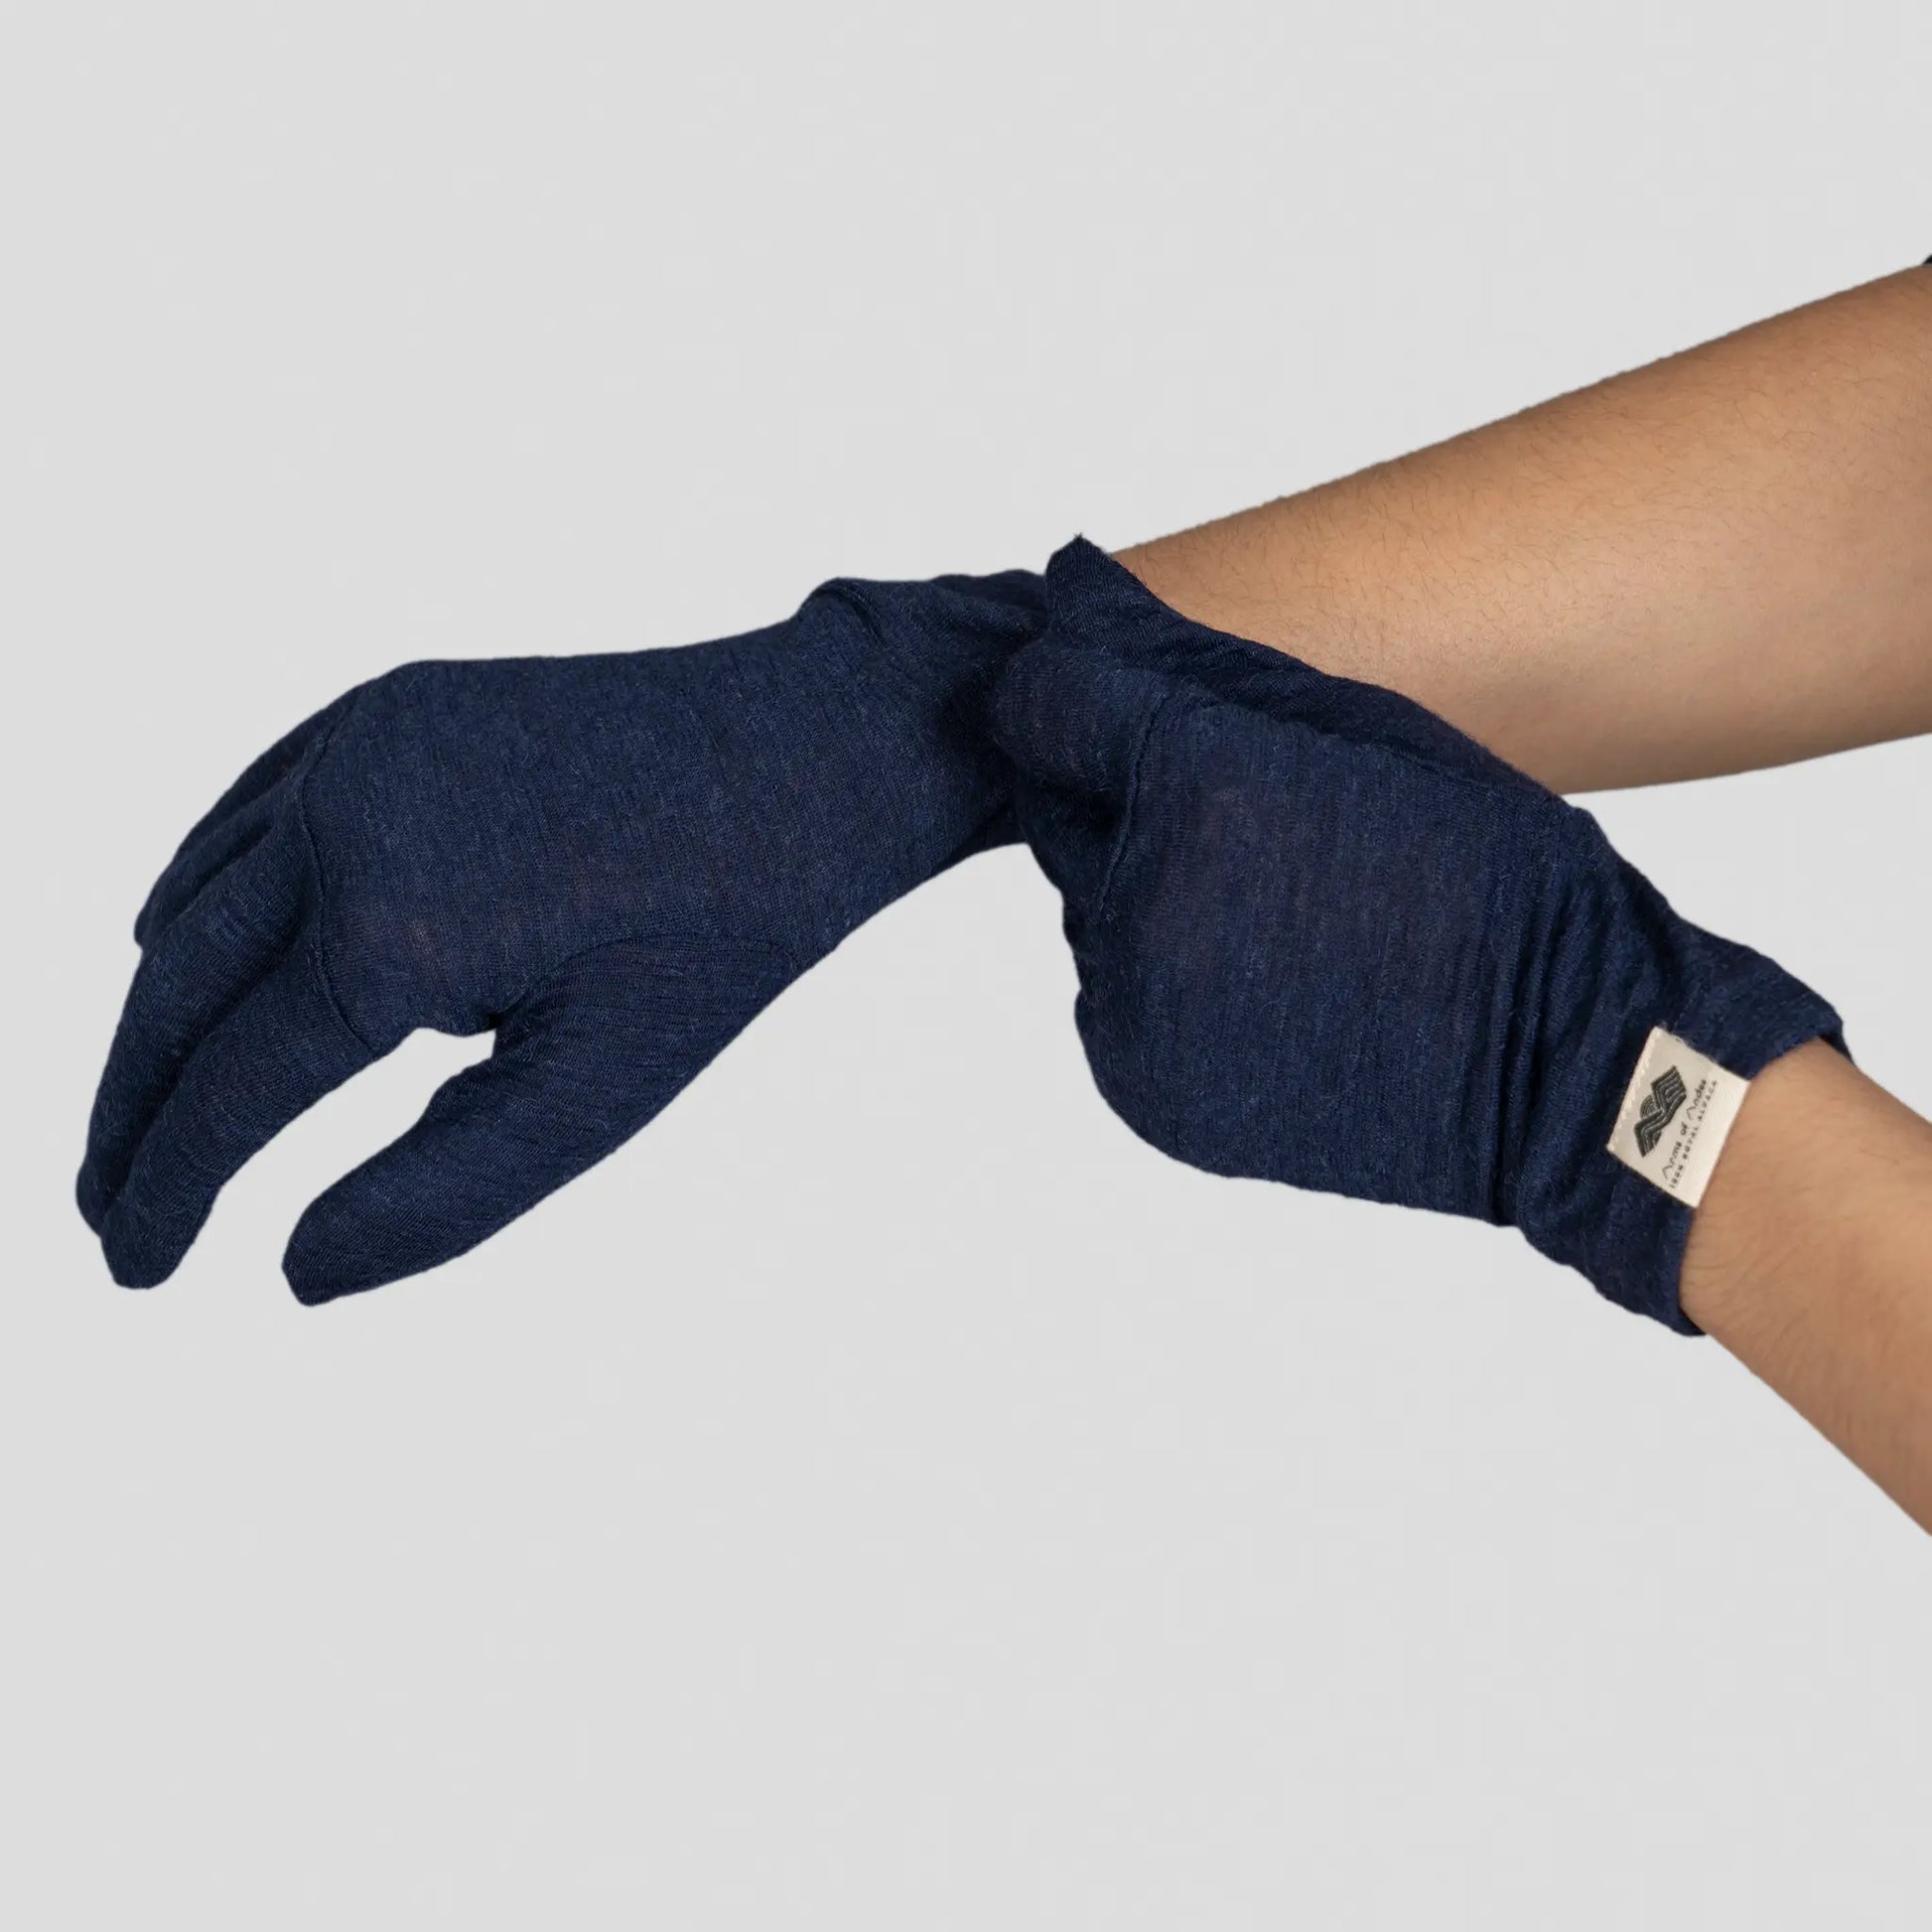 glove most comfortable liners ultralight color natural blue